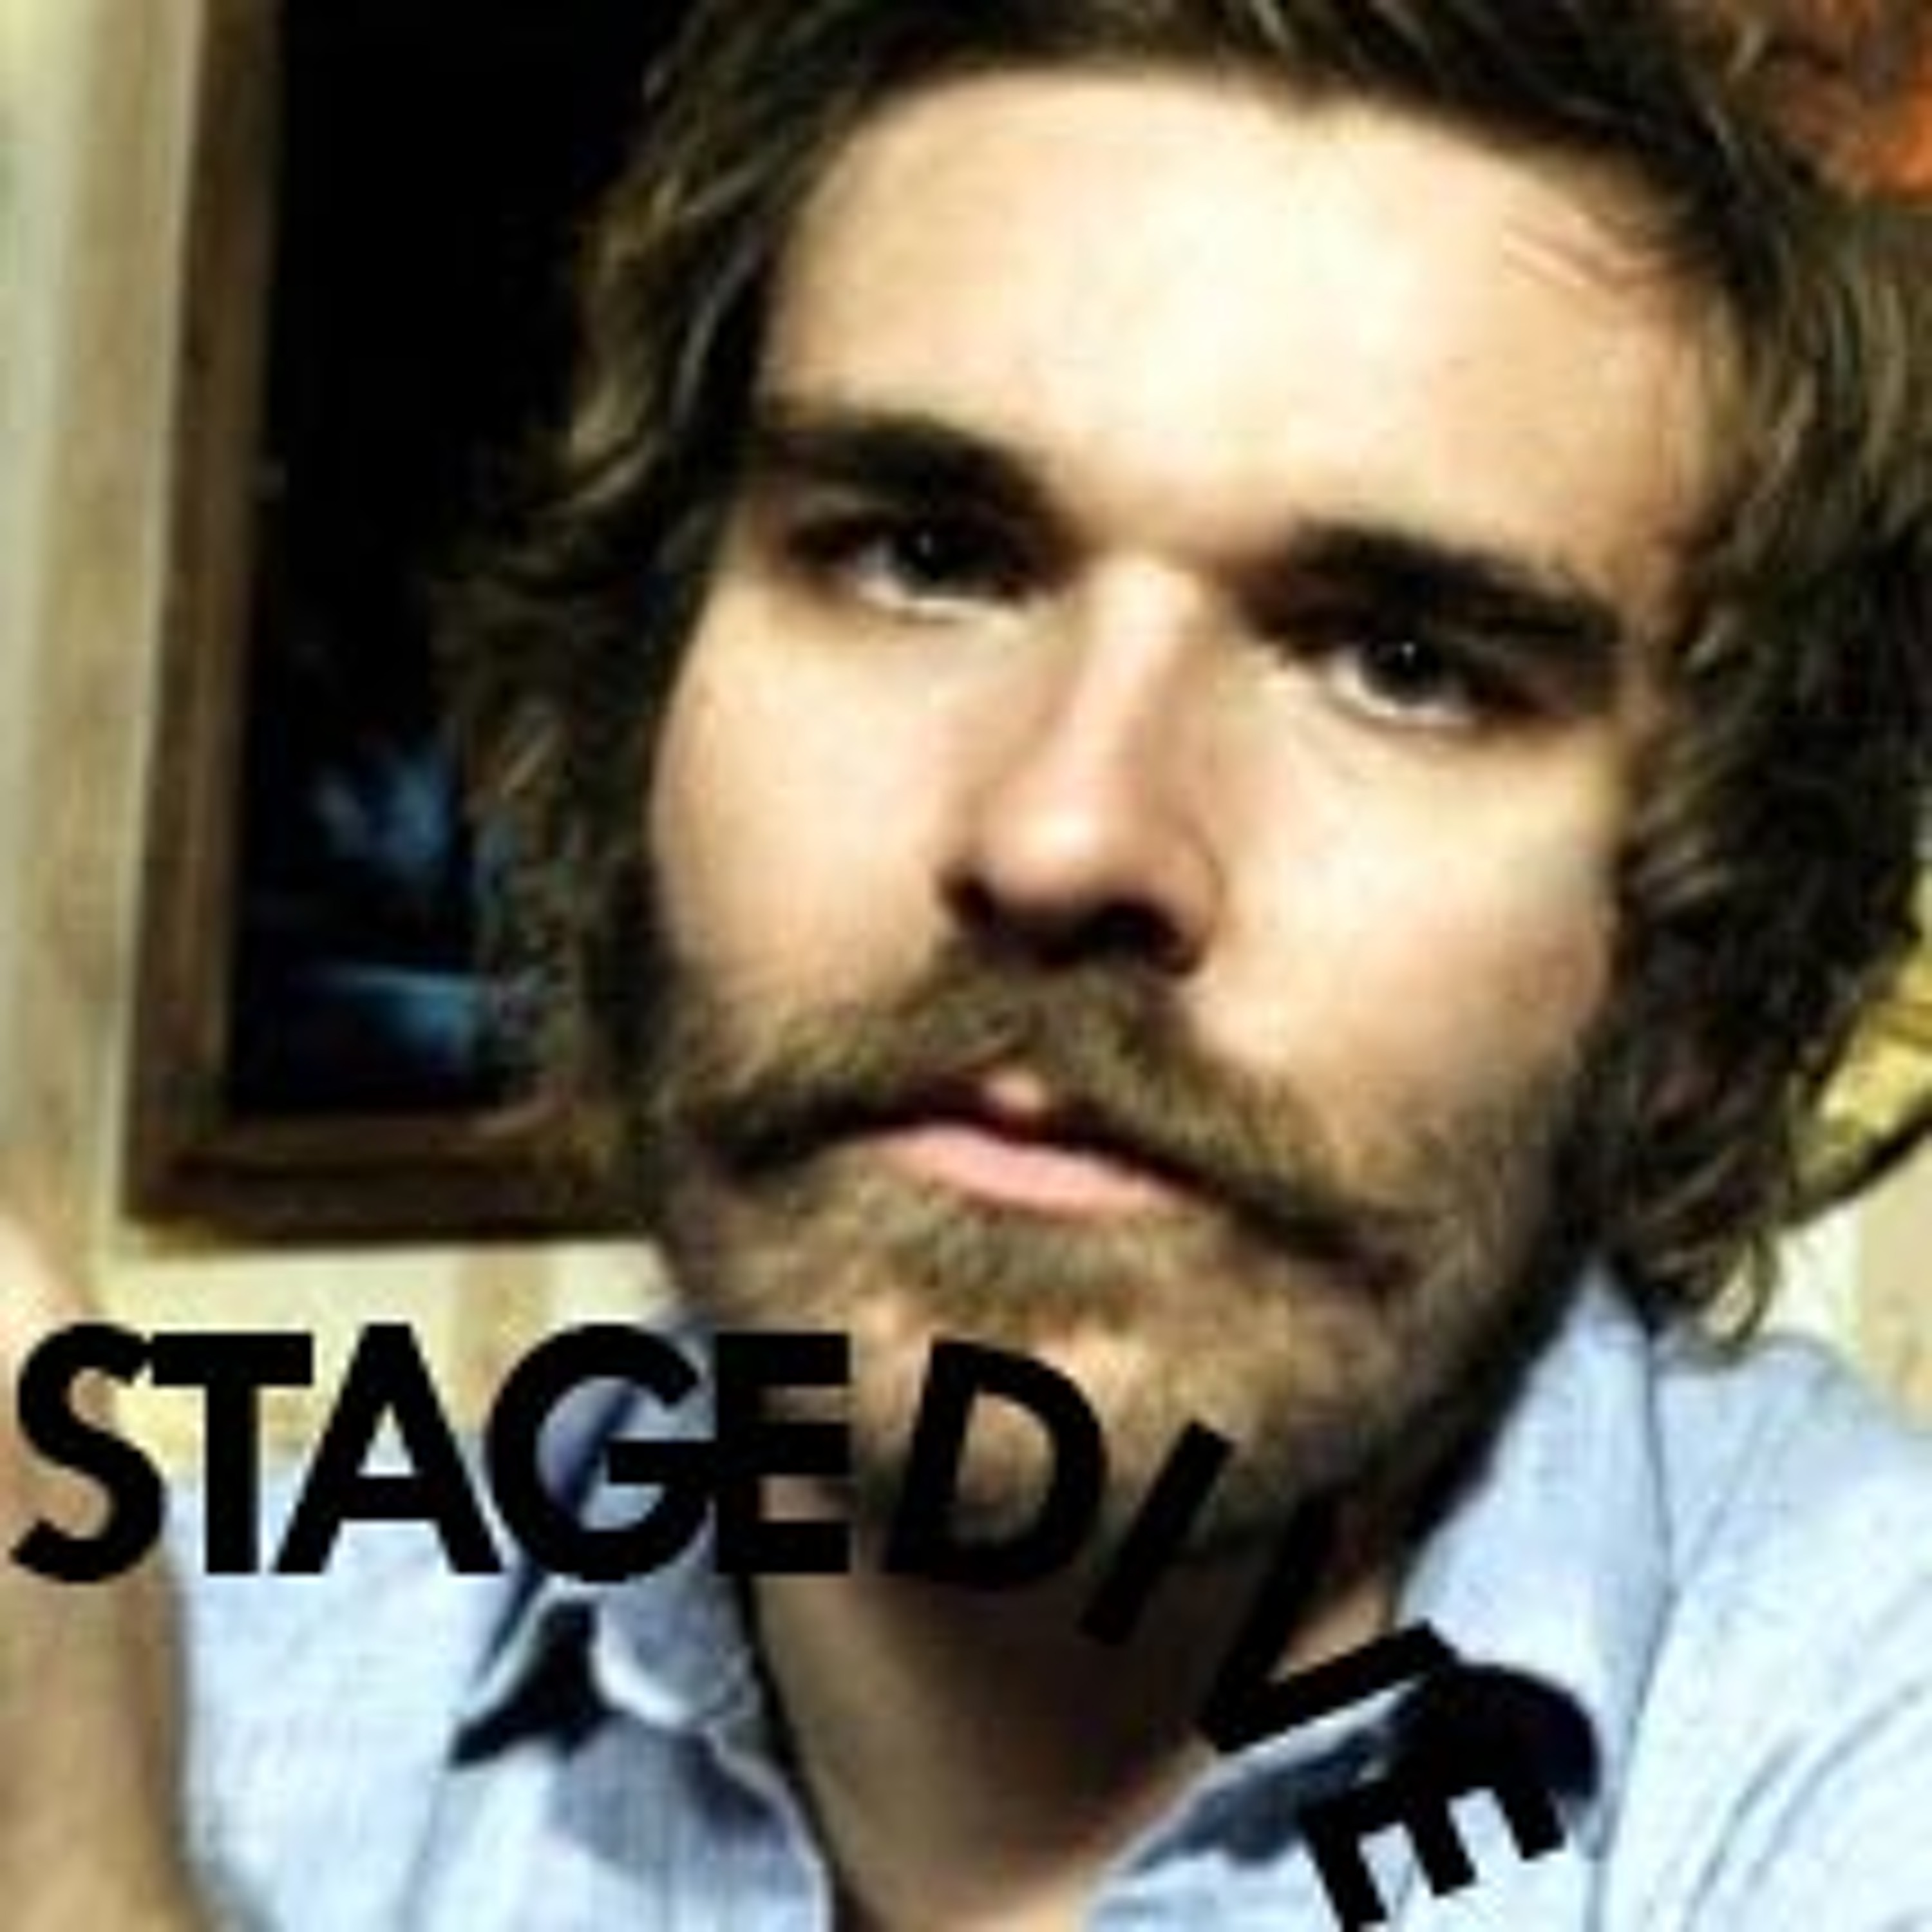 Stagedive -2- Red Wanting Blue’s Scott Terry